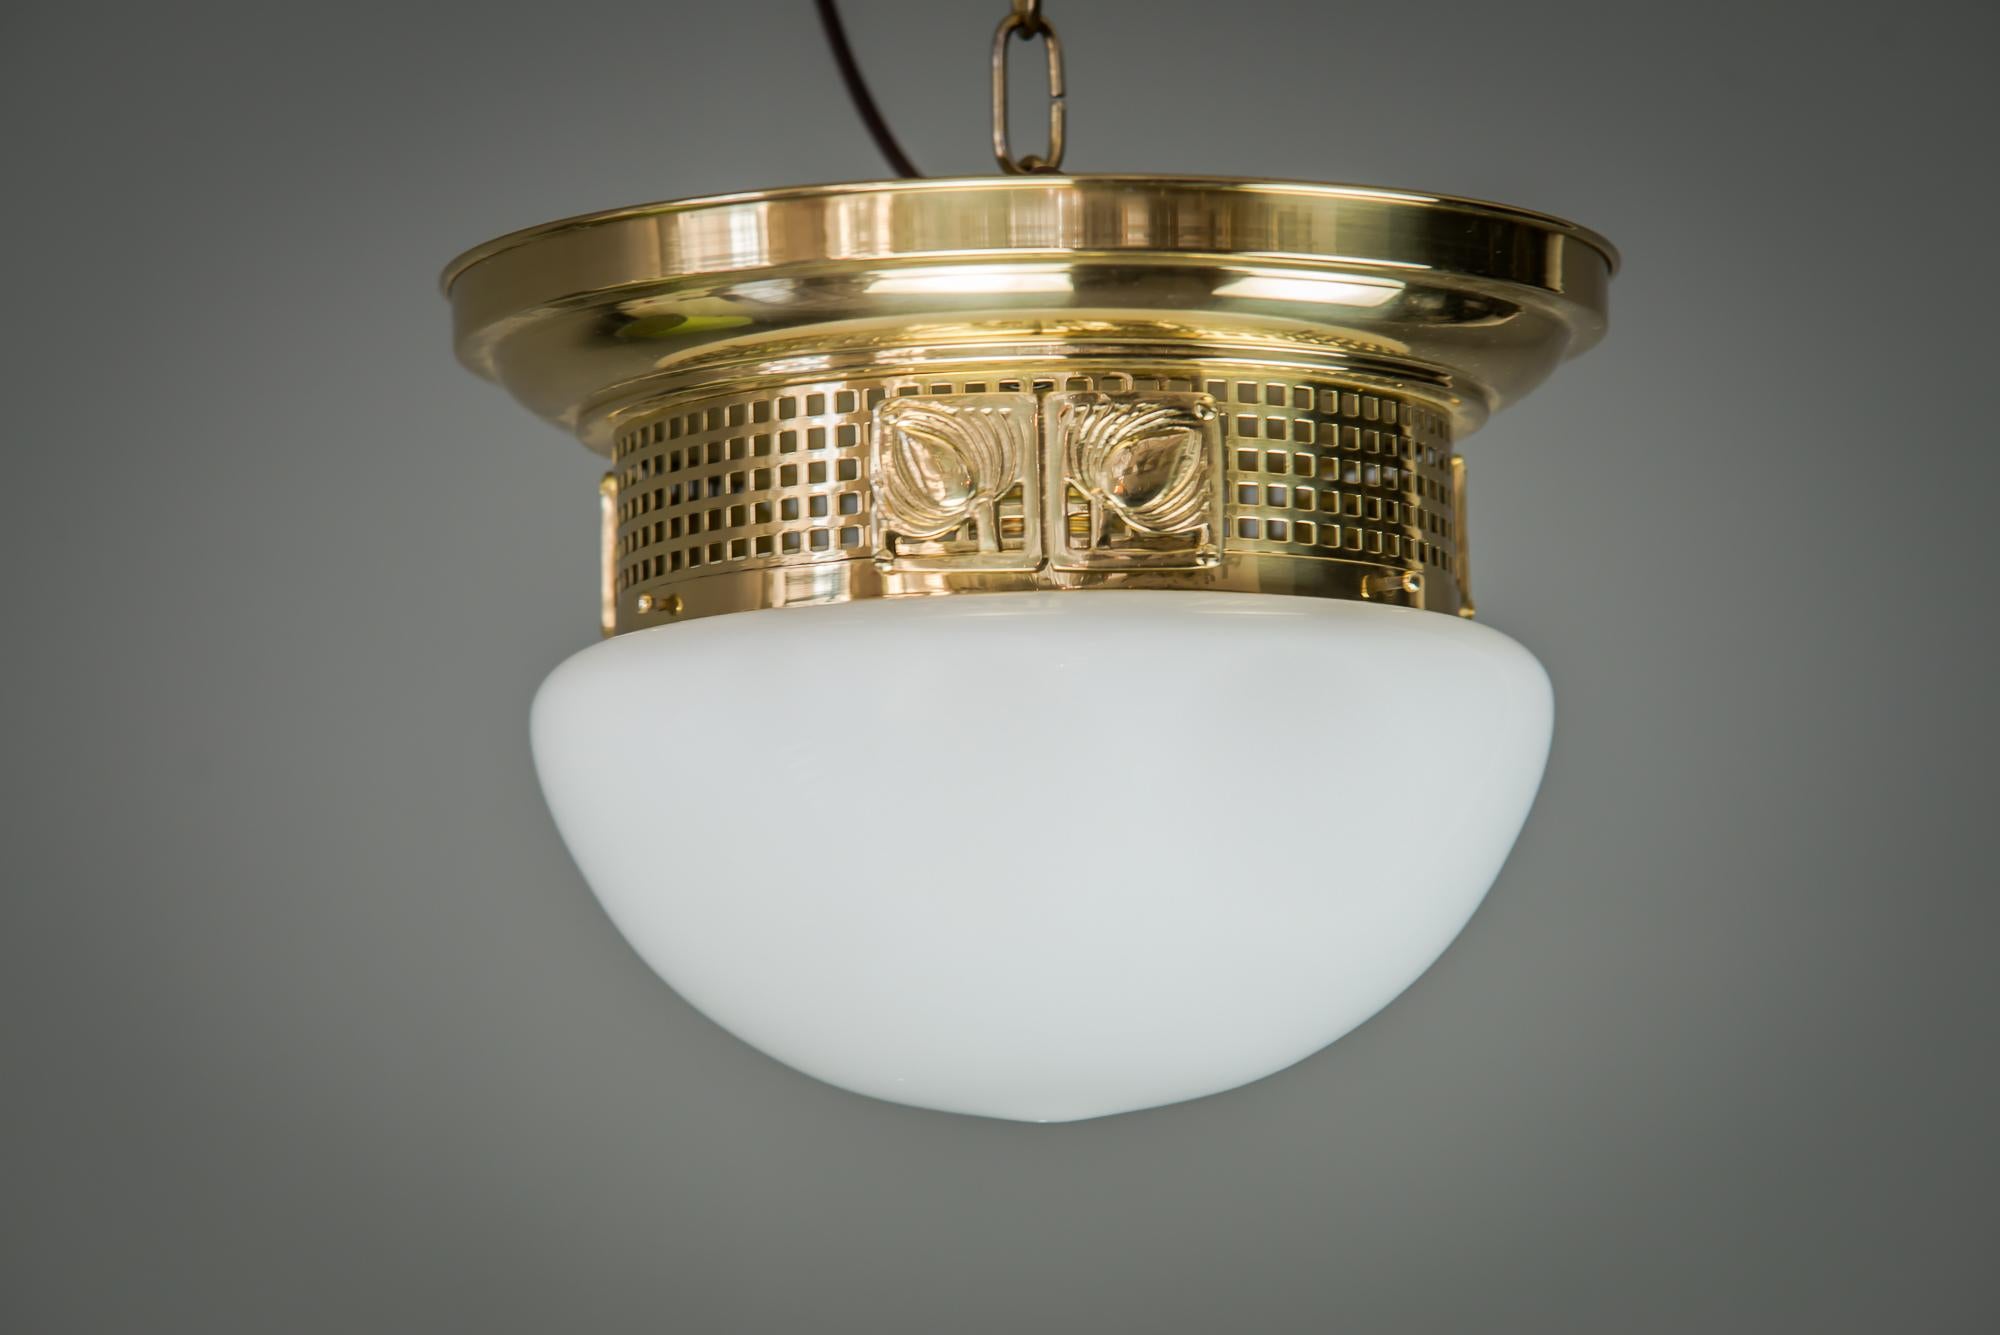 Ceiling lamp with opal glass in the style of Jugendstil
This is a reproduction.
We have also the same in nickel-plated
Opal glass
Depending on the order quantity it can take up to 2 weeks to finish the lamps
Polished and stove enameled.